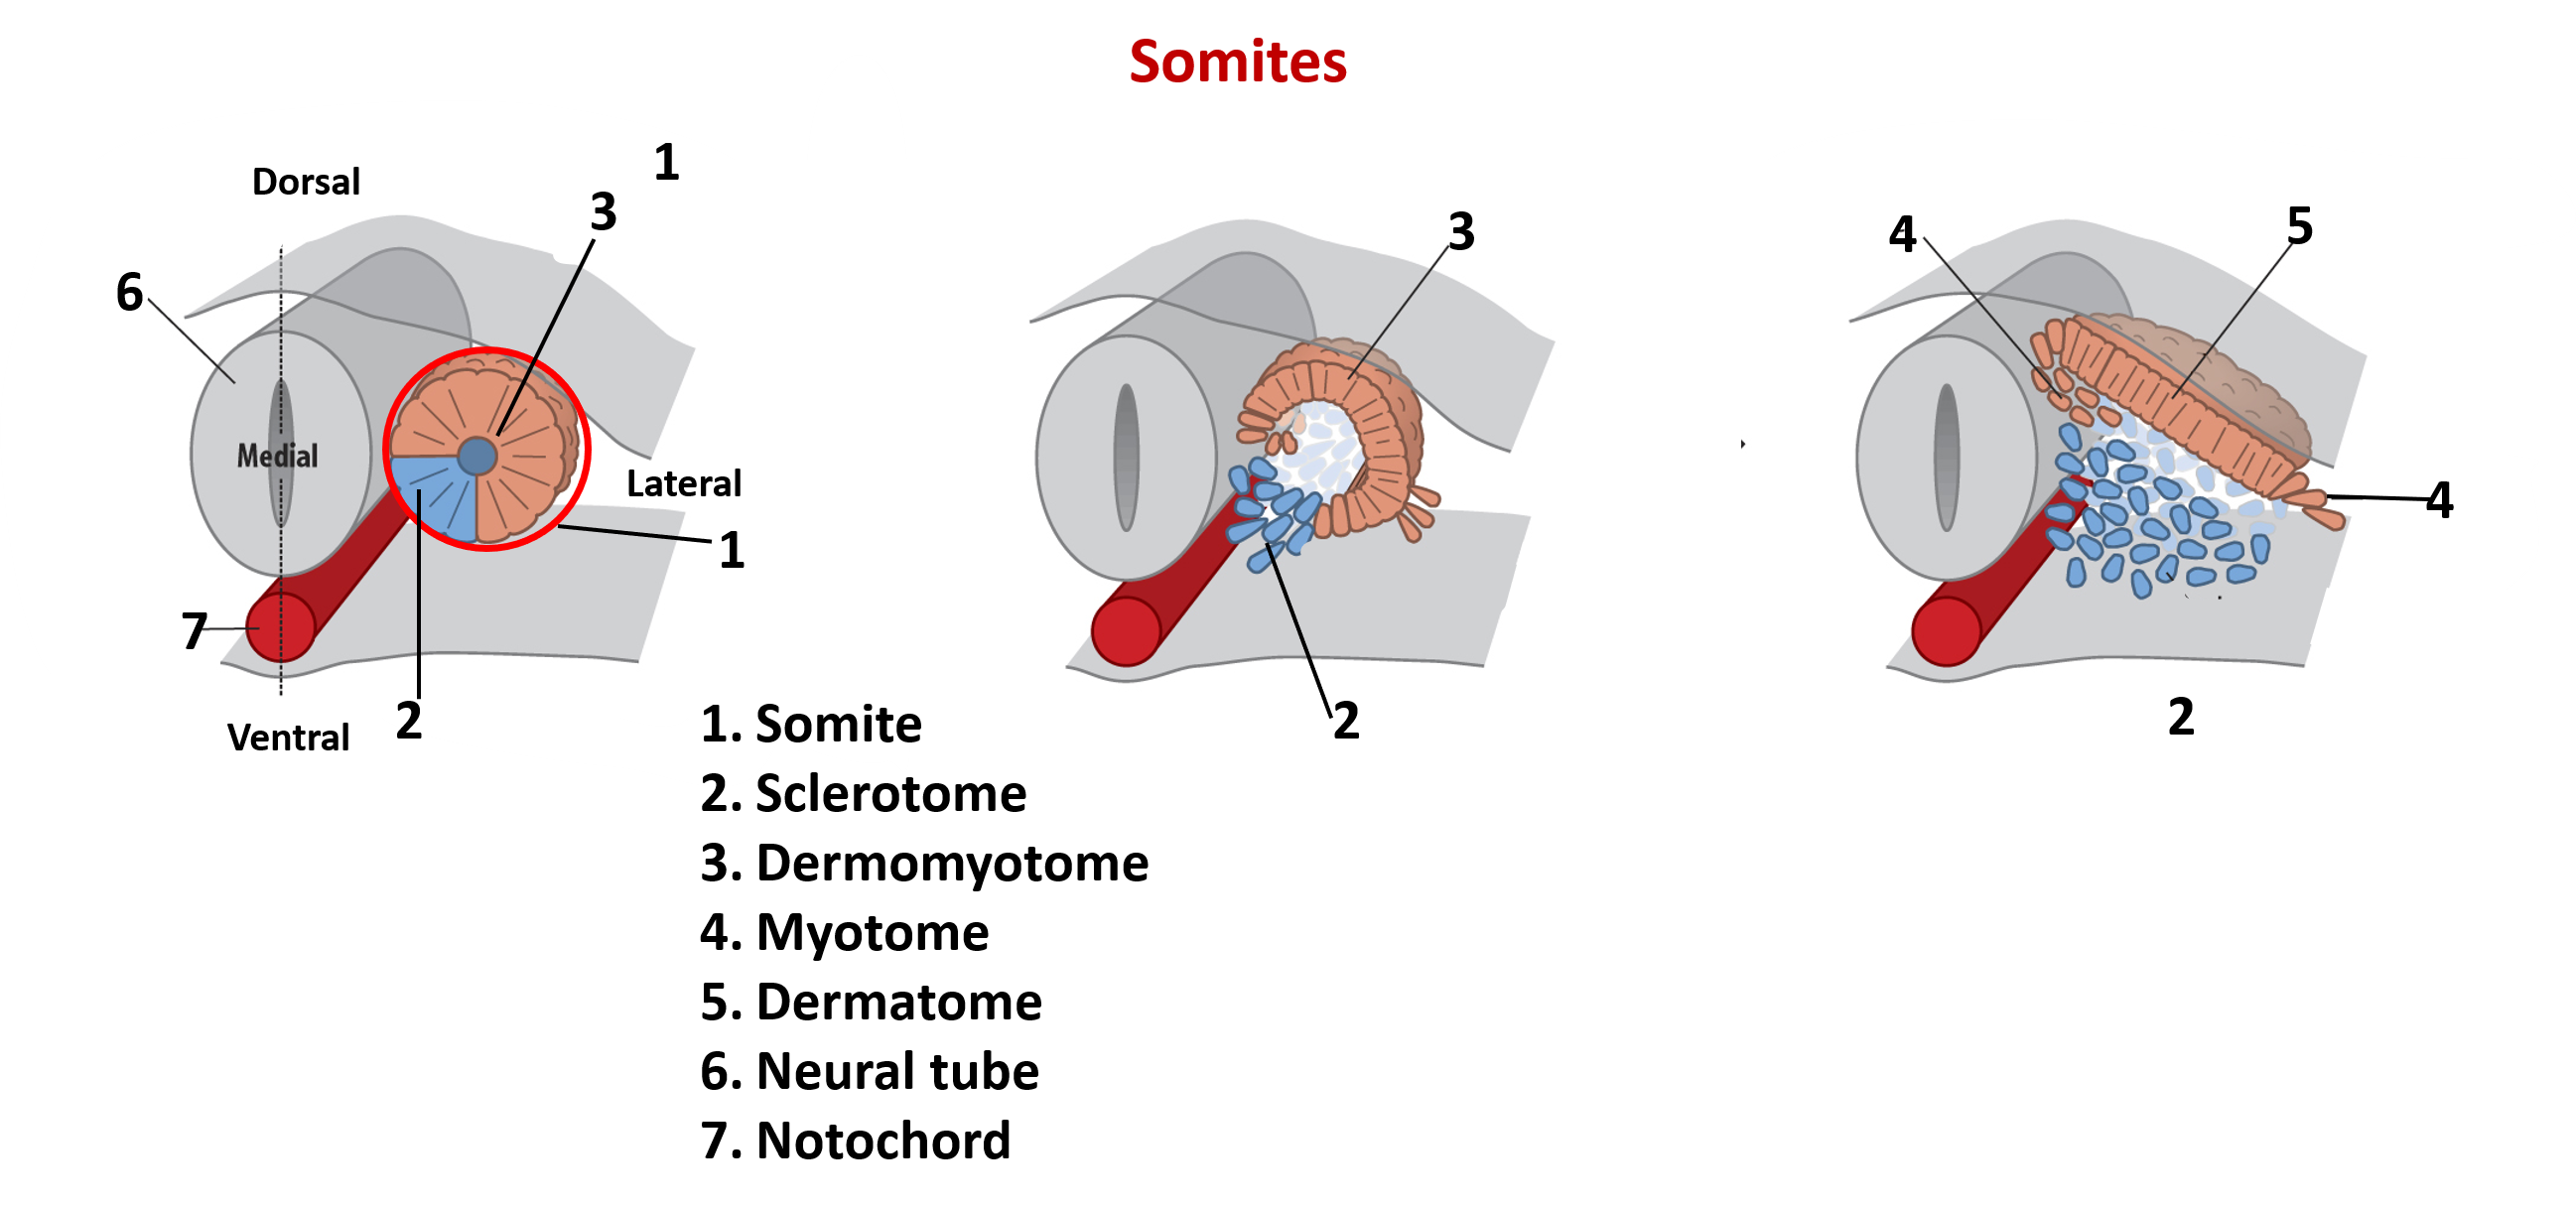 somite- scleletome , myotome and dermotome